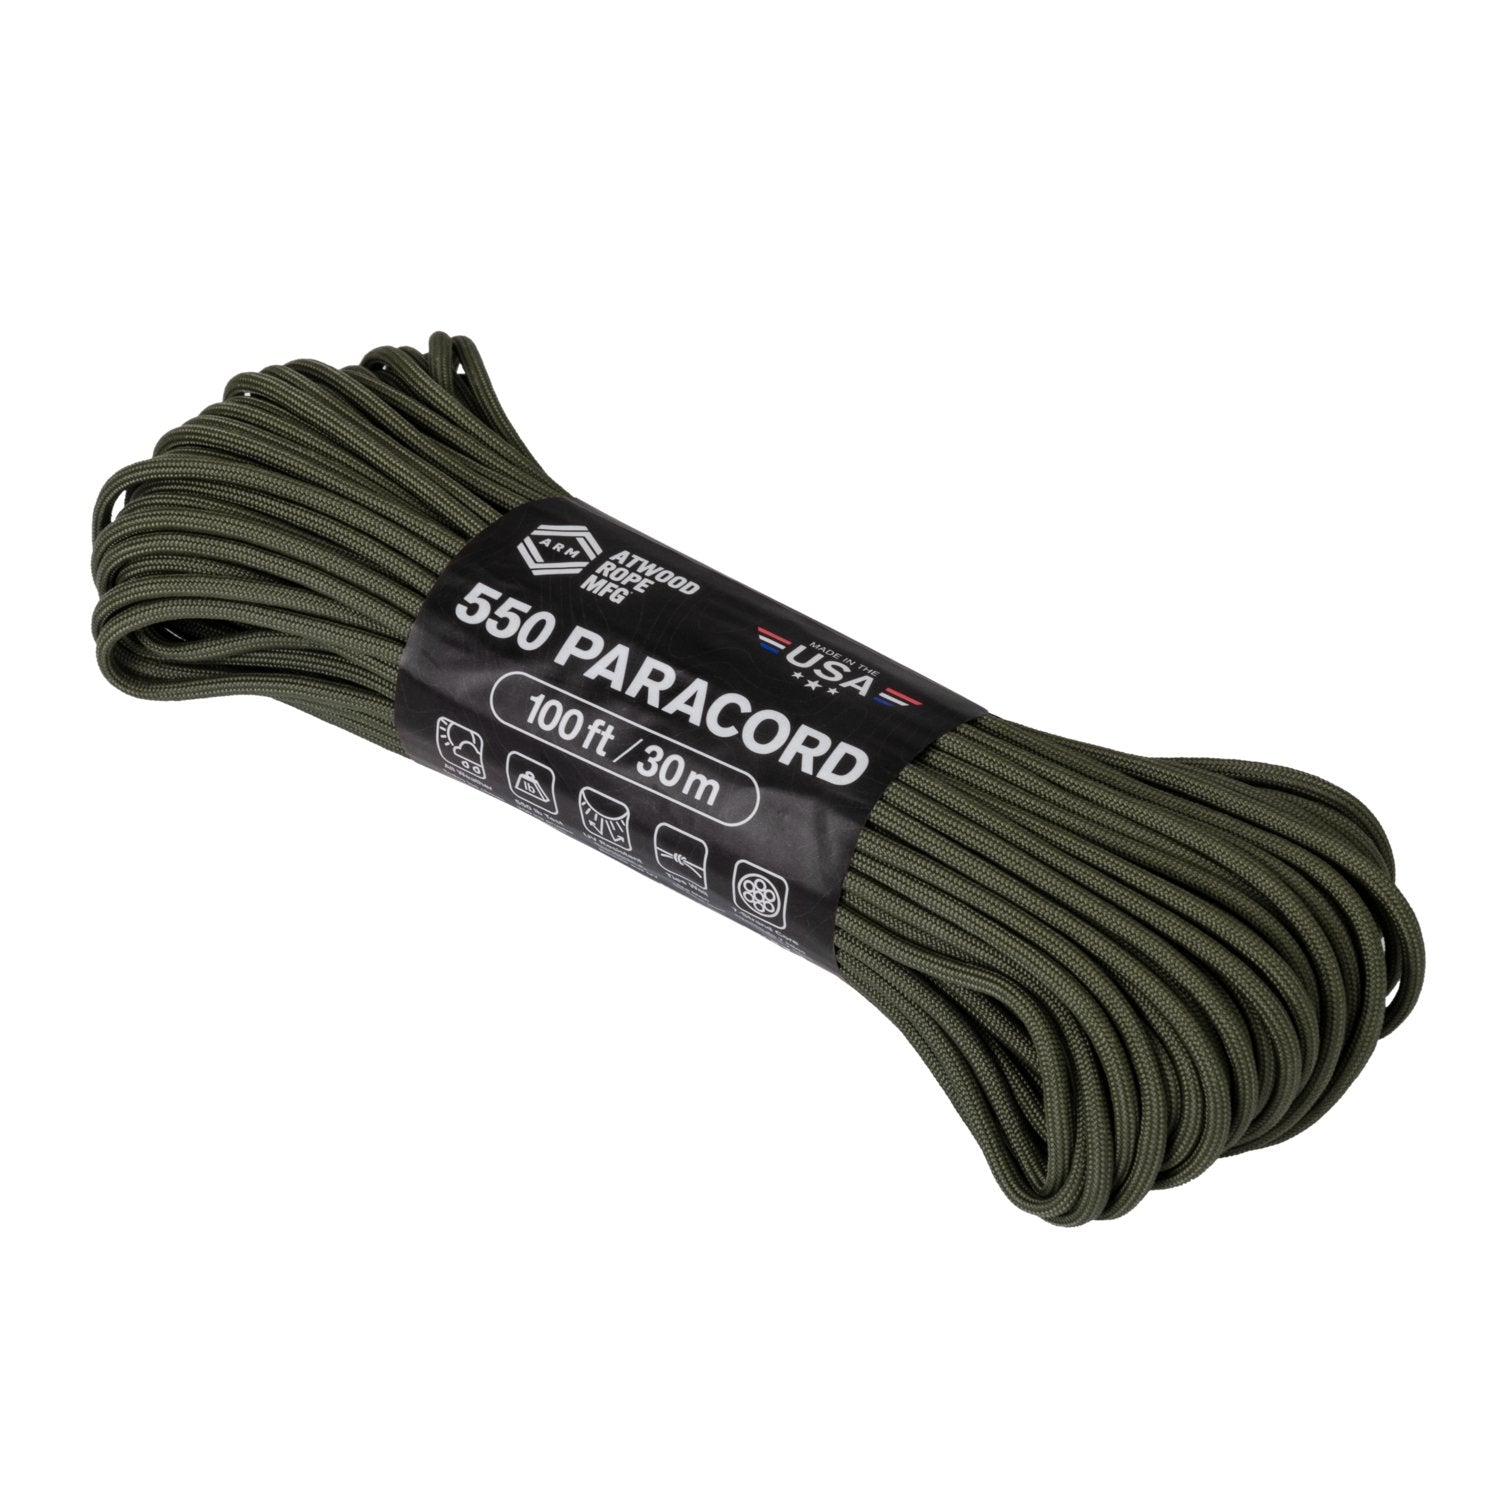 New Atwood Rope Products  Order New Atwood Products Including